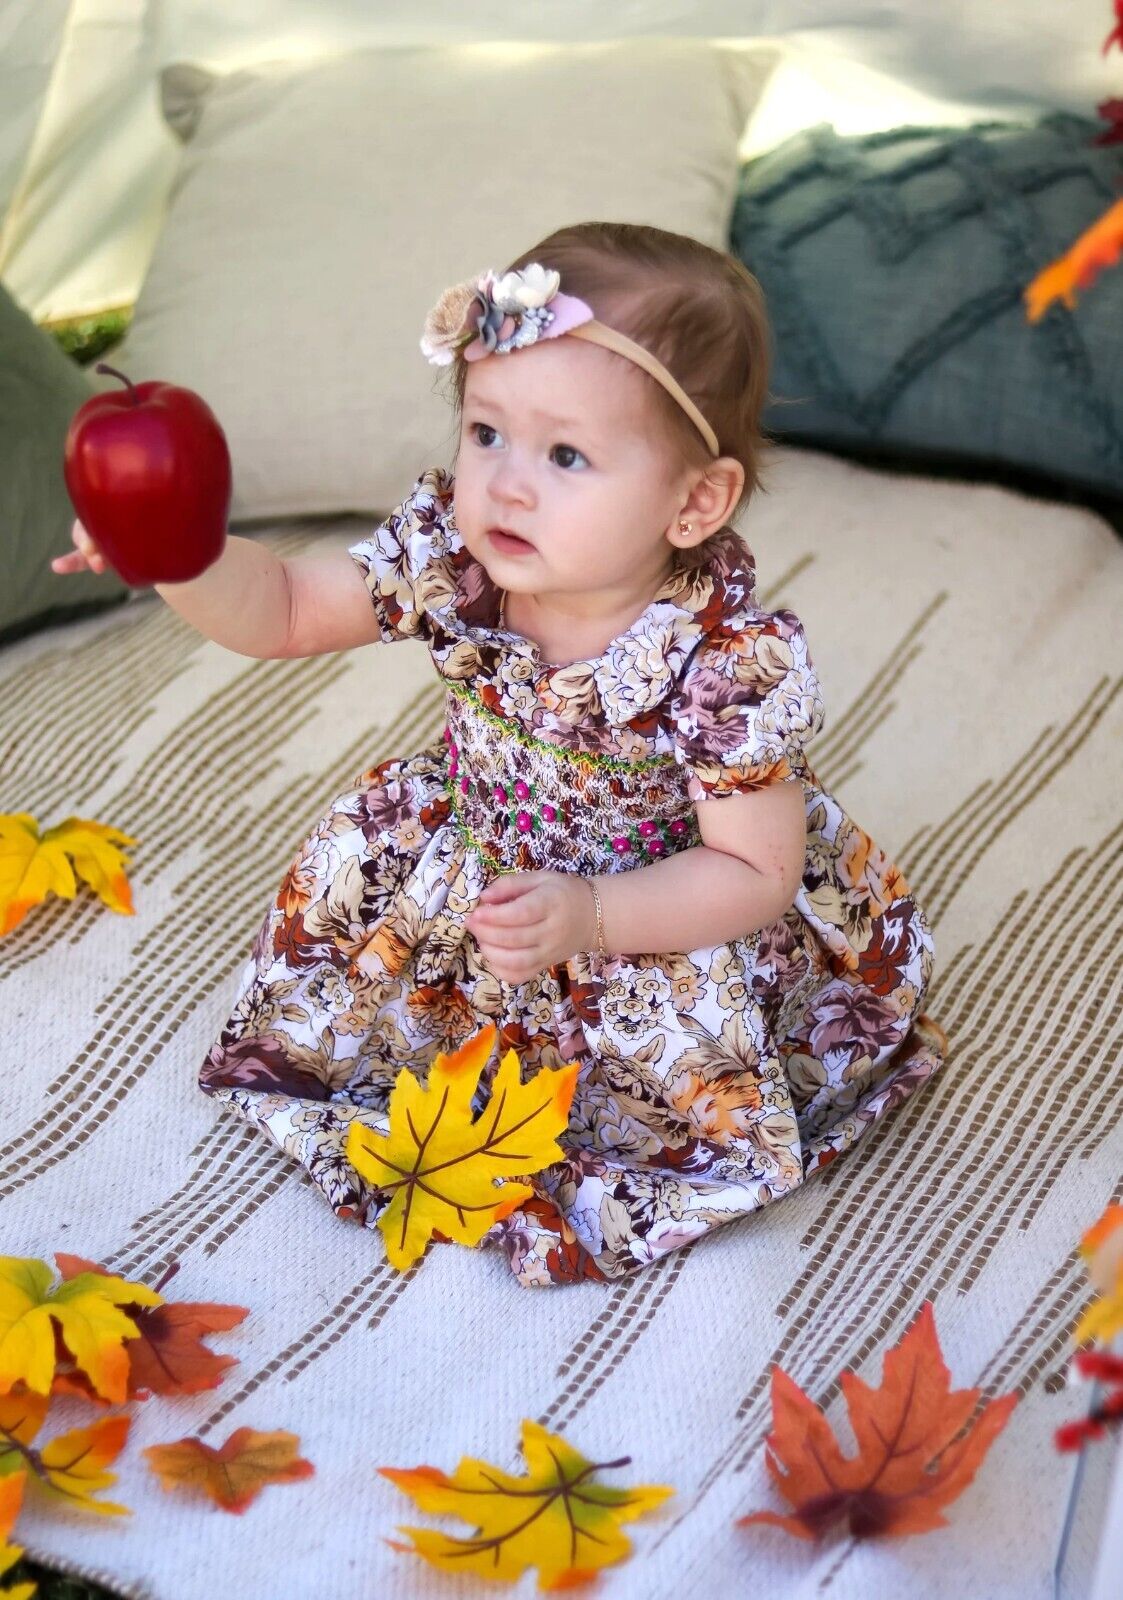 Fall is in the air: Vintage style Hand Smocked flared baby & Toddler